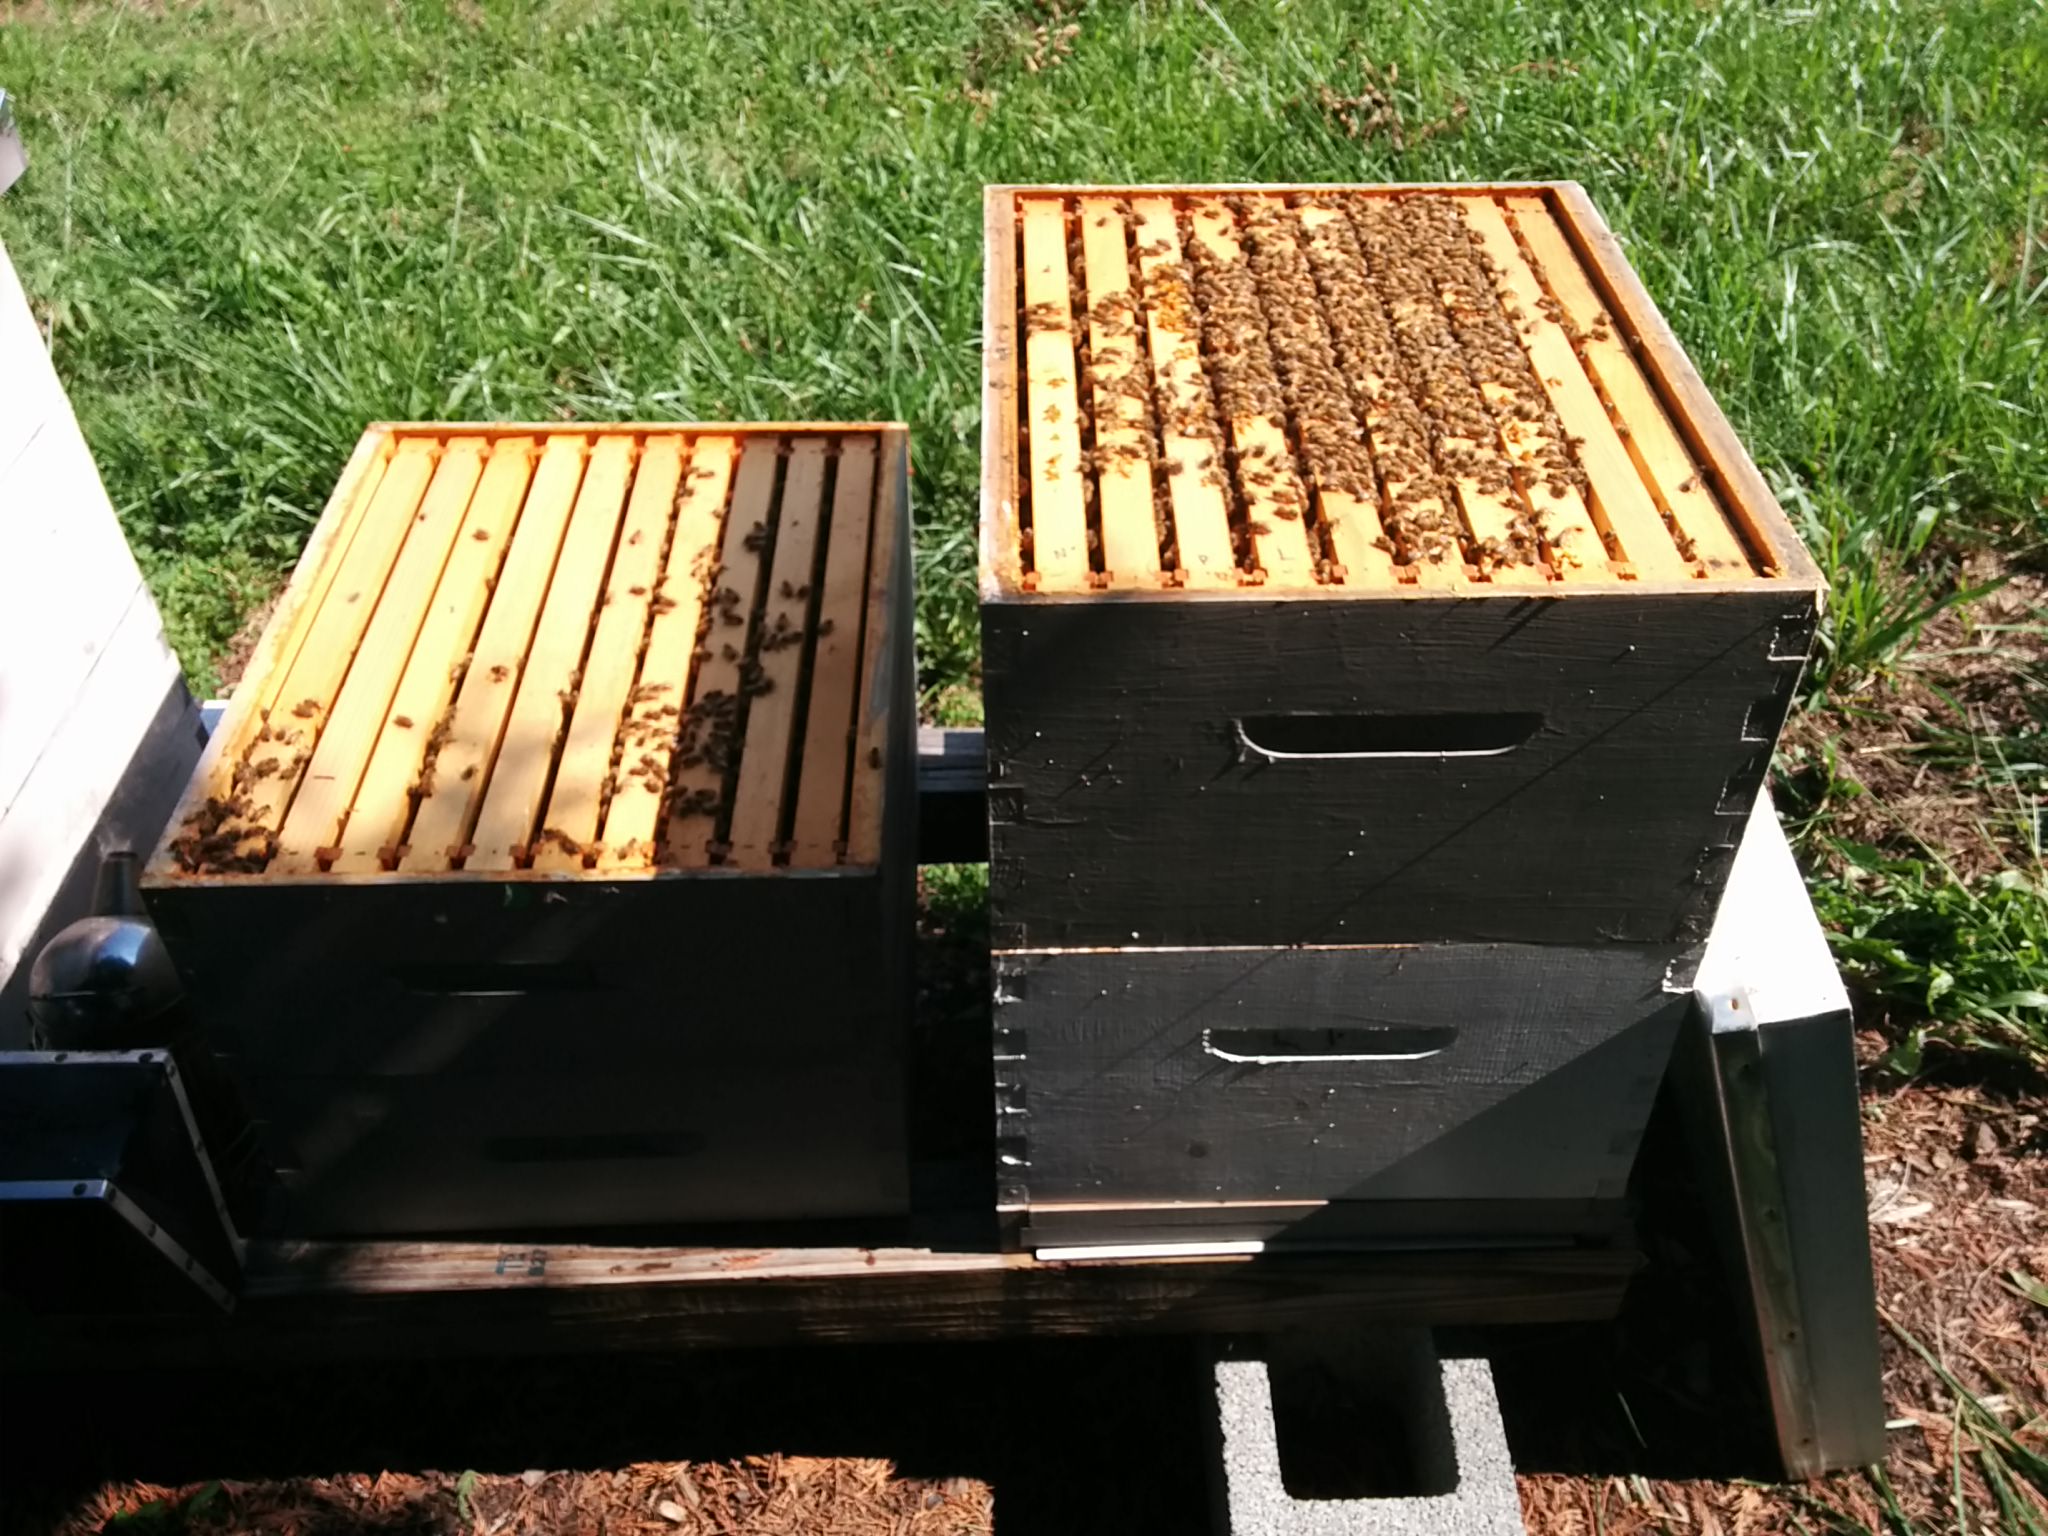 Hive 1 top supers and brood boxes